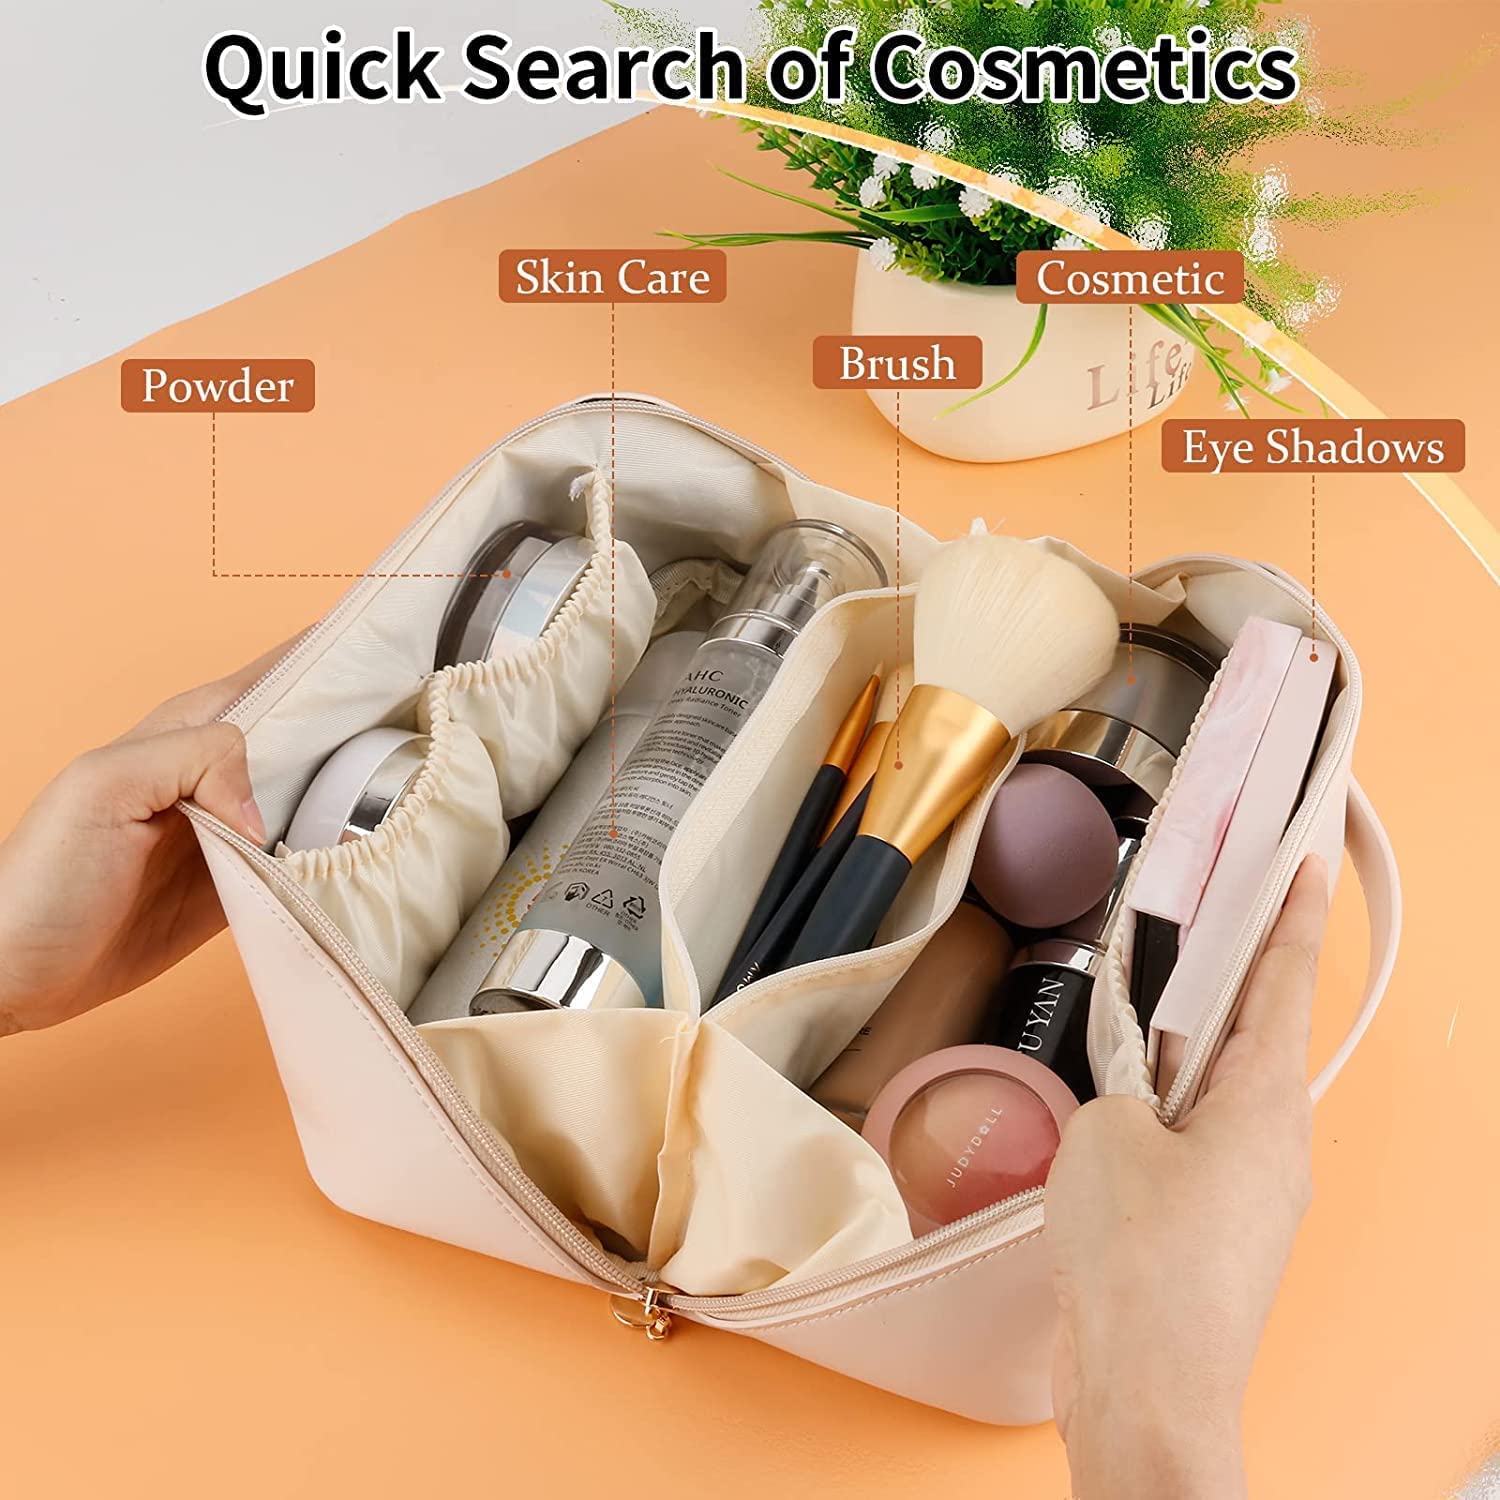 Large Capacity 12 Cms Cosmetic Travel Bag, Women's Makeup Travel Bag Portable Leather Cosmetics Bag, Makeup Storage Bags with Handle and Divider, Wide Opening Cosmetic Organizer Bags (CREAM)